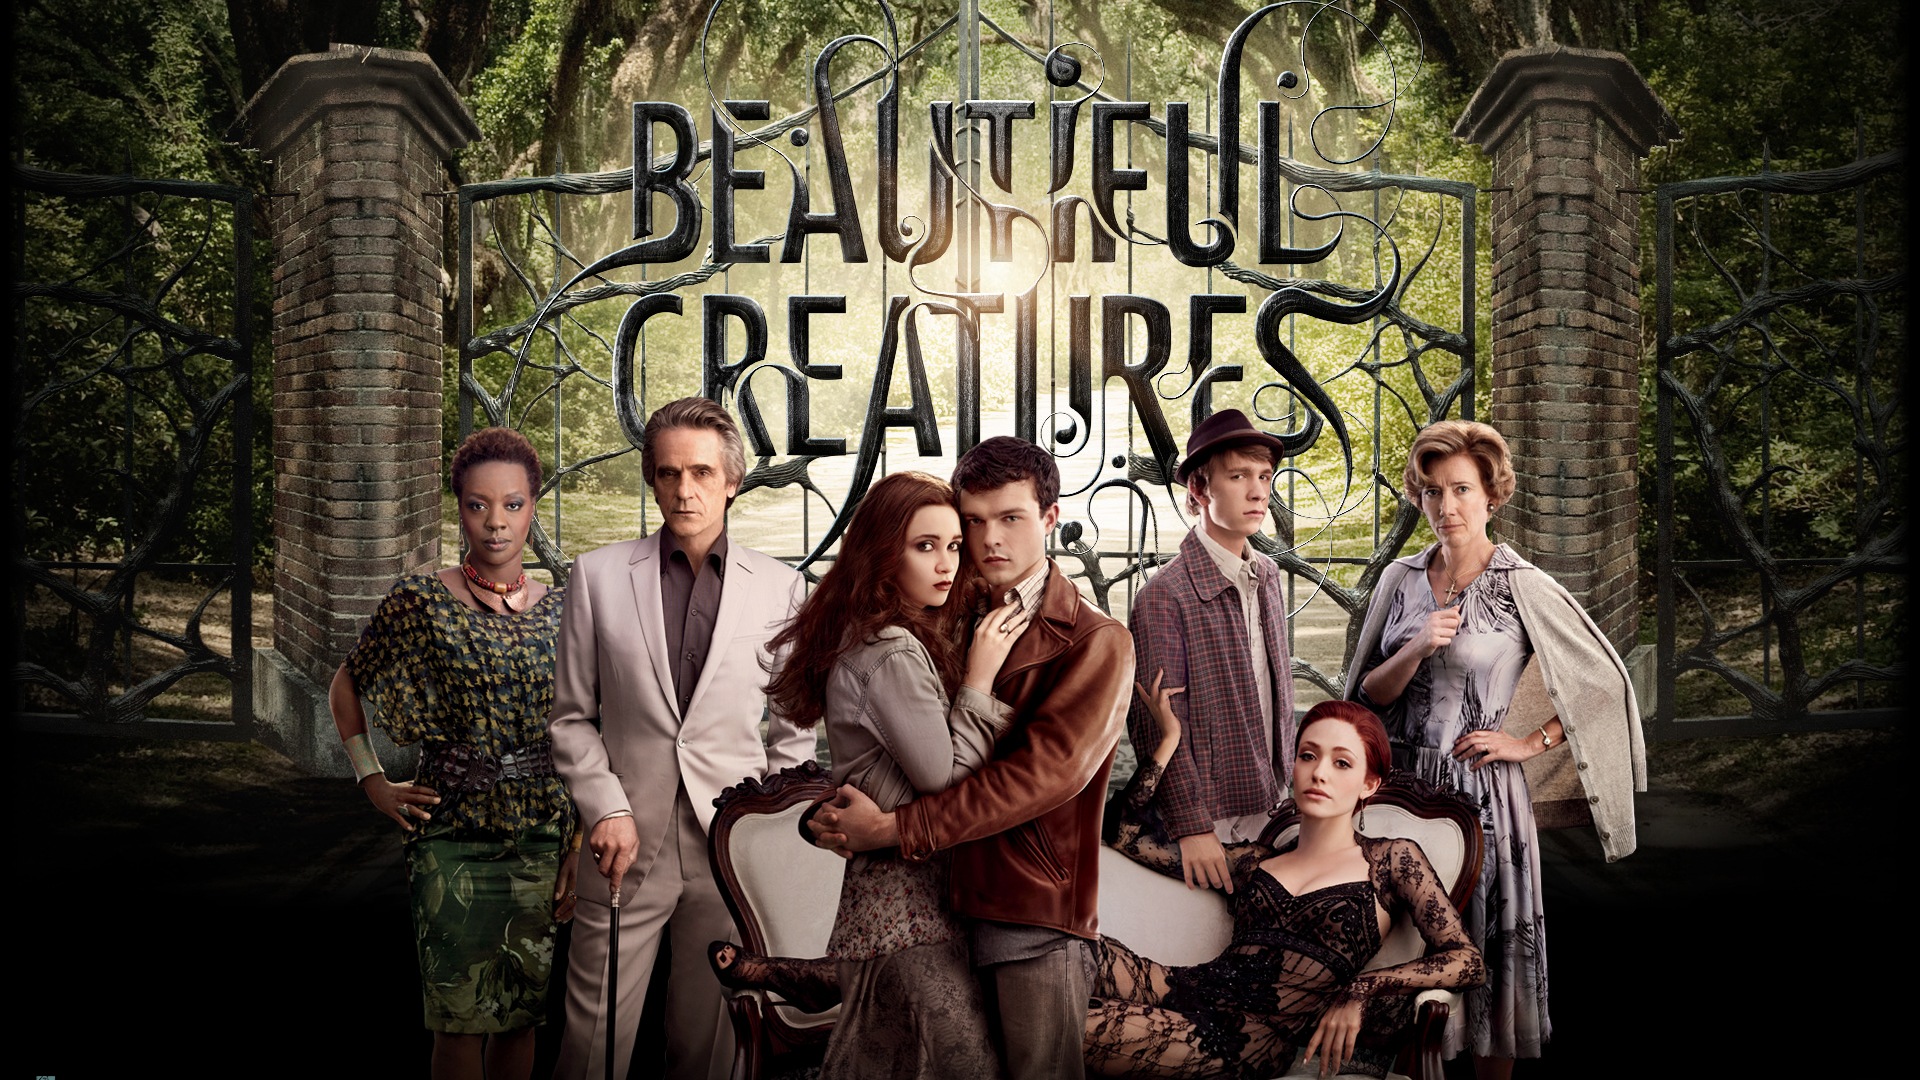 Beautiful Creatures 2013 HD movie wallpapers #9 - 1920x1080